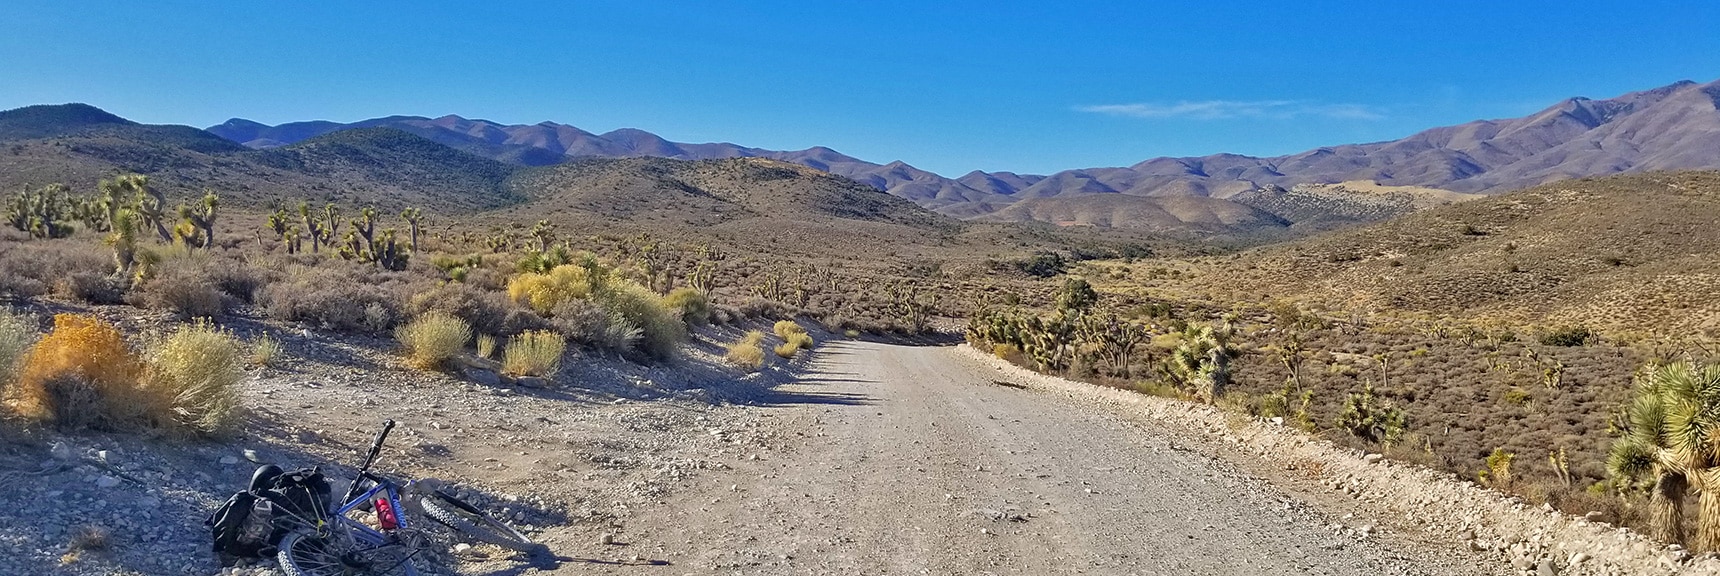 Main Approach Road to Left Toward La Madre Mountain Northern Summit Area | Harris Springs Rd, Harris Mountain Rd | Spring Mountains Wilderness, Nevada